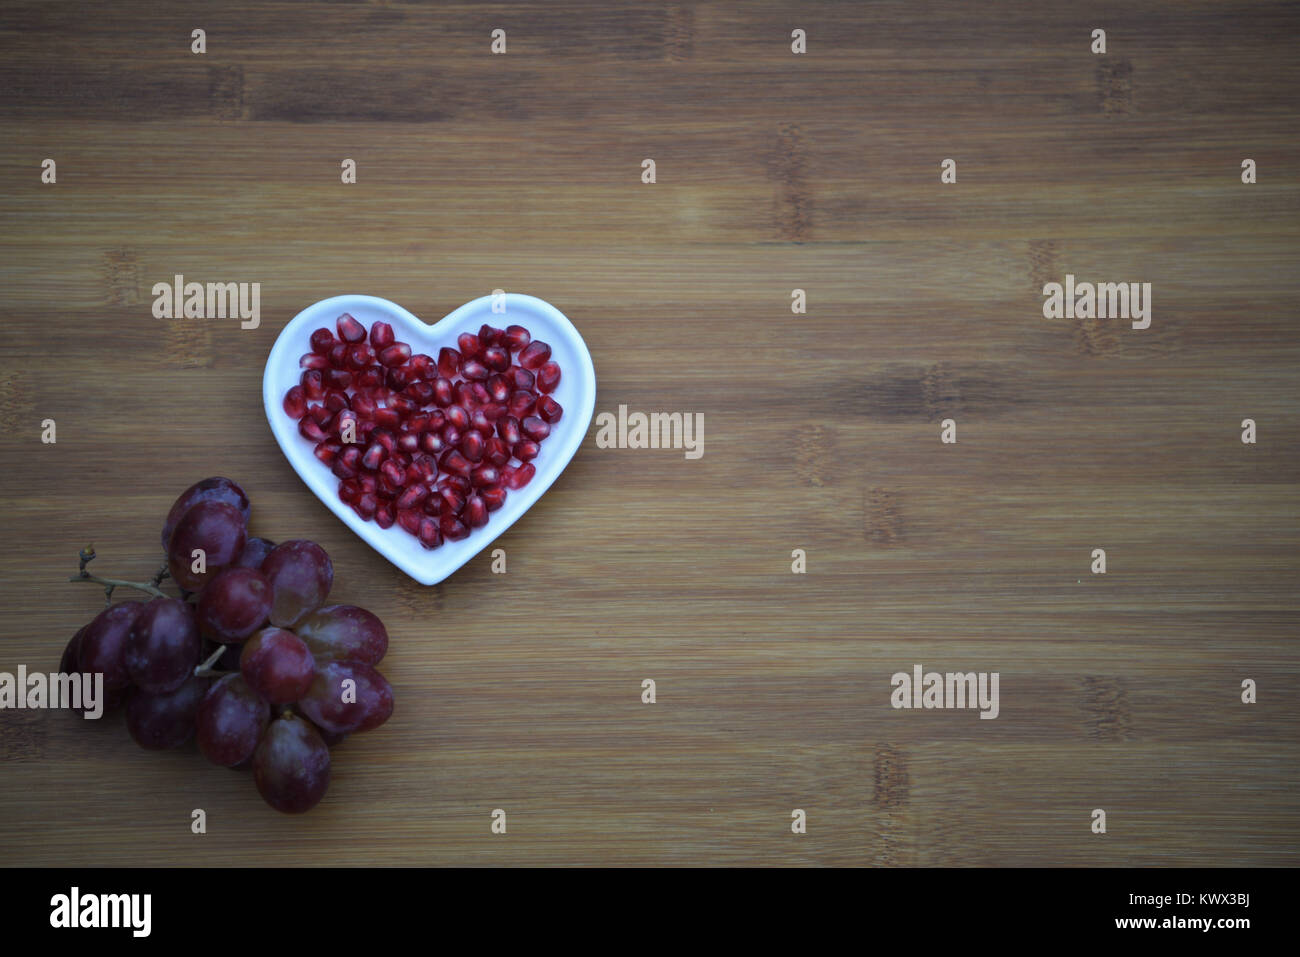 healthy food photography of red juicy shiny pomegranate seeds in love heart shape dish with a bunch of purple grapes on wood background and space Stock Photo